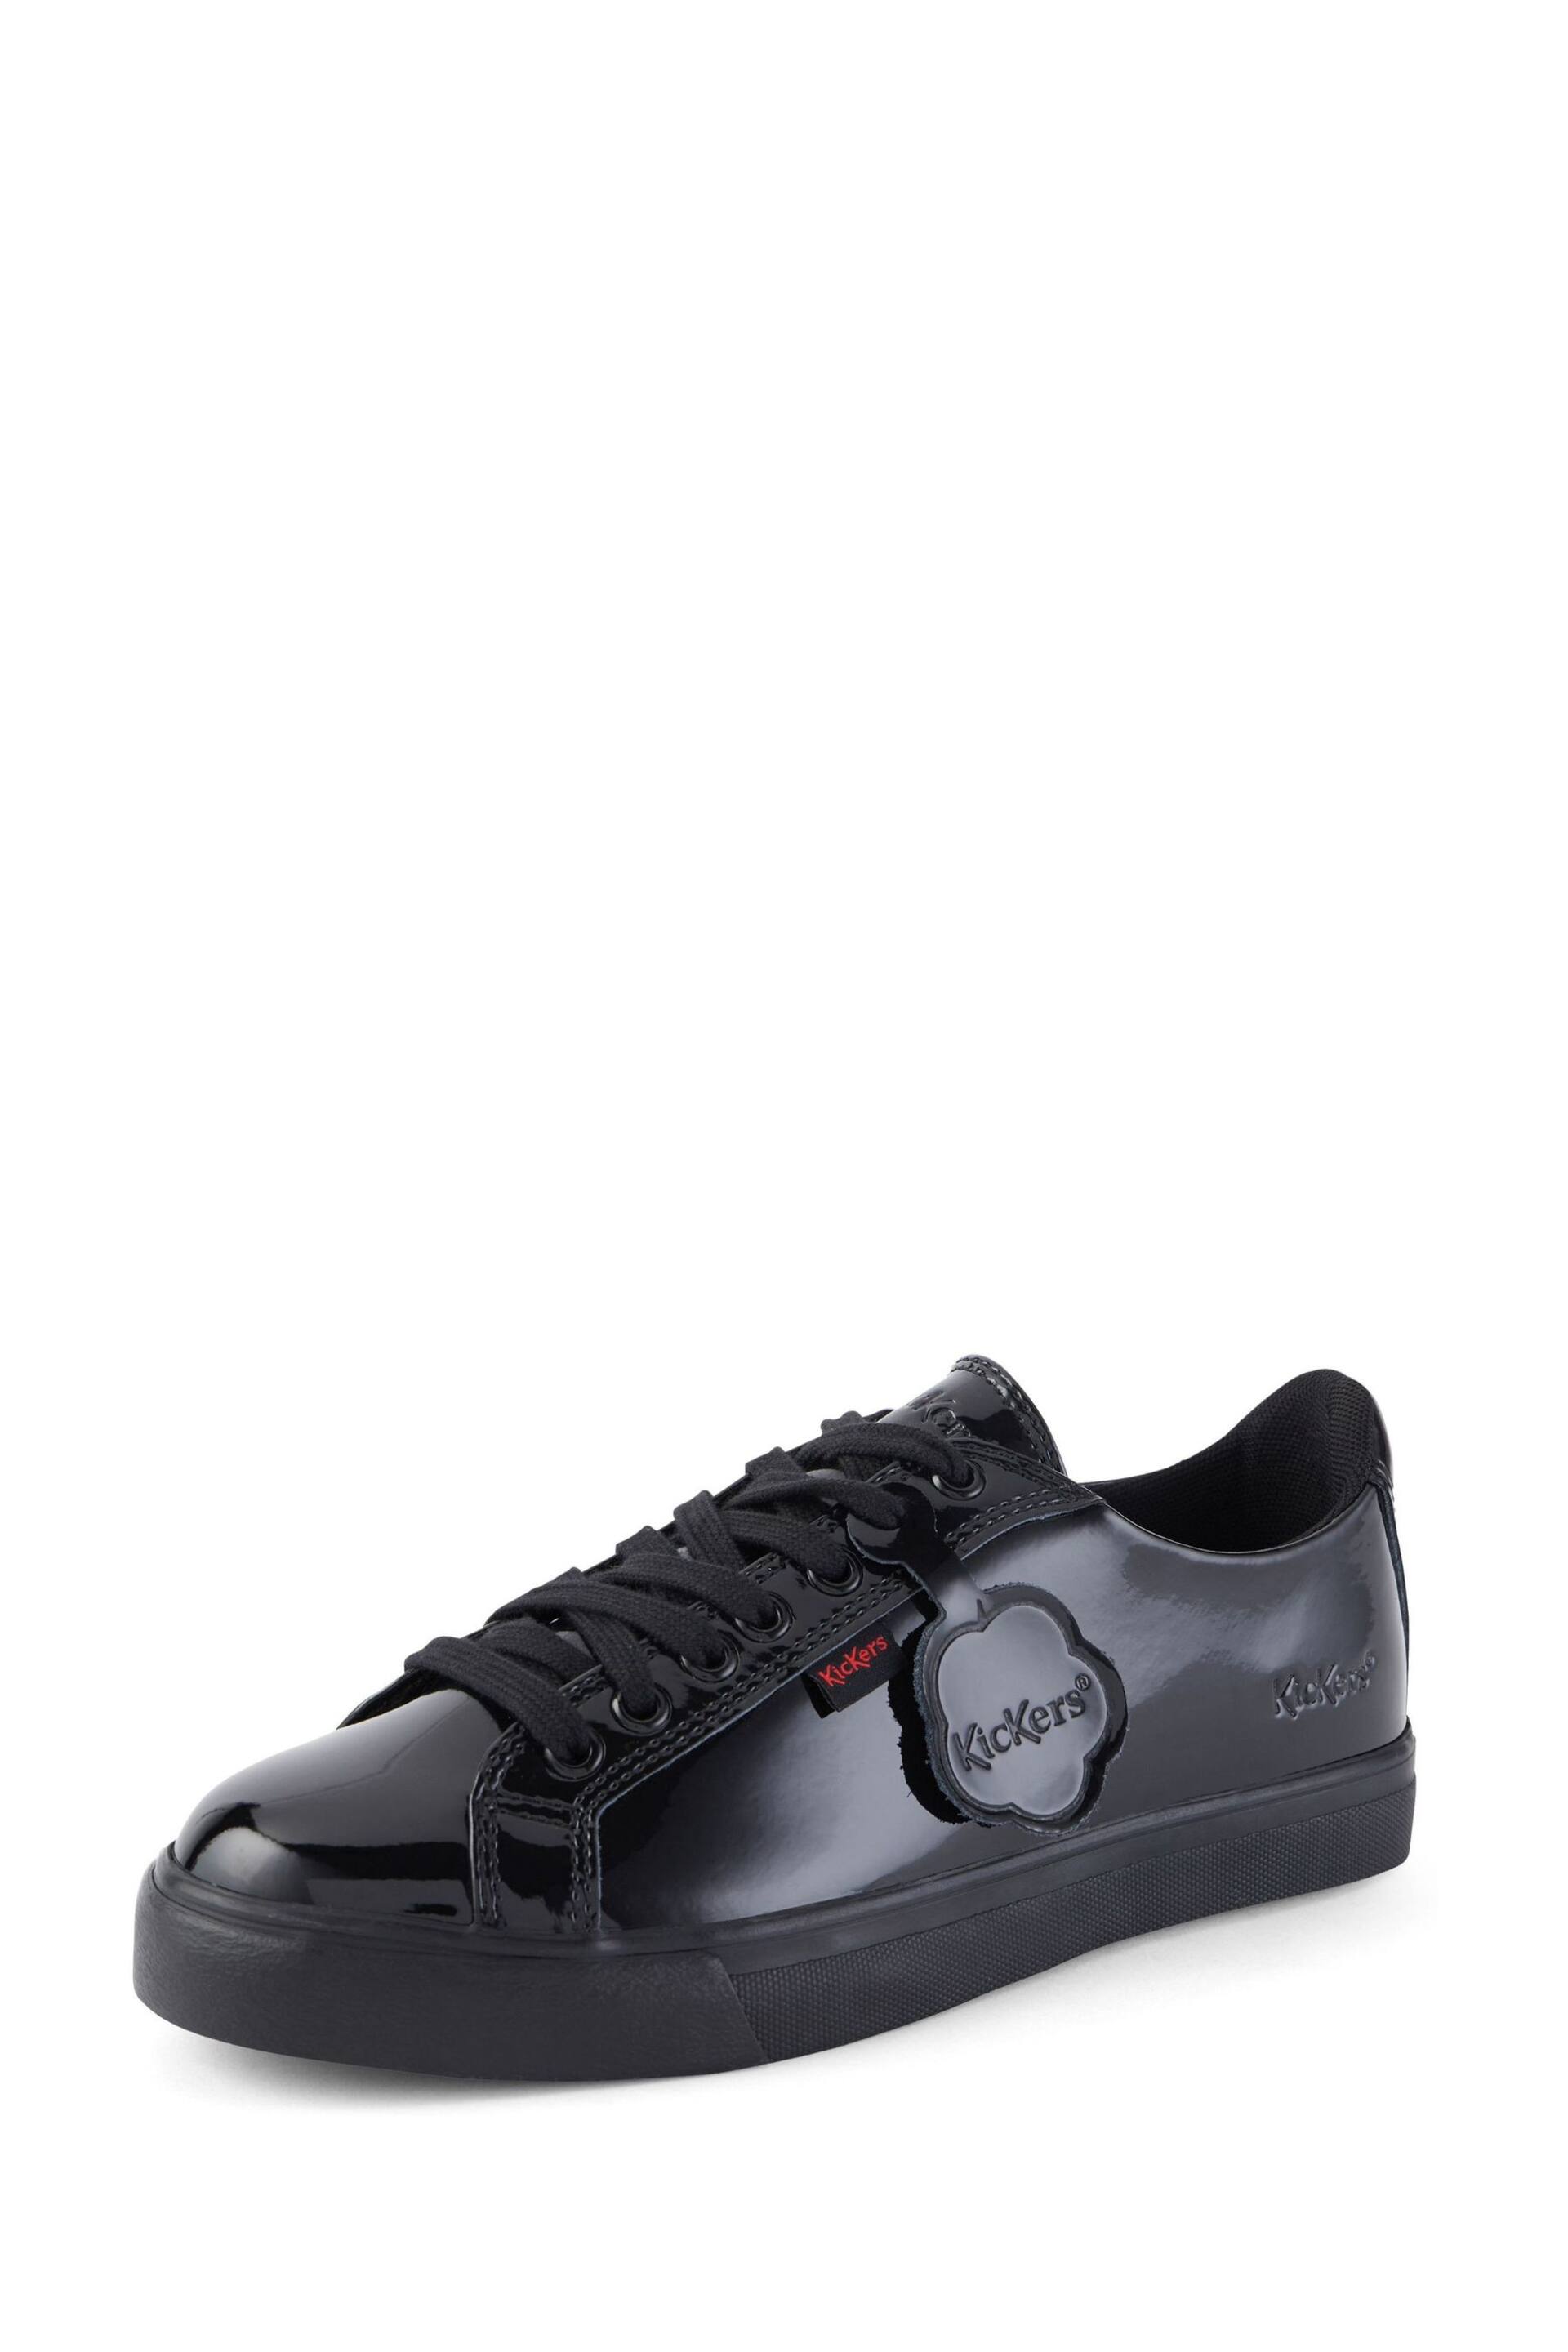 Kickers Black Tovni Lacer Shoes - Image 3 of 8